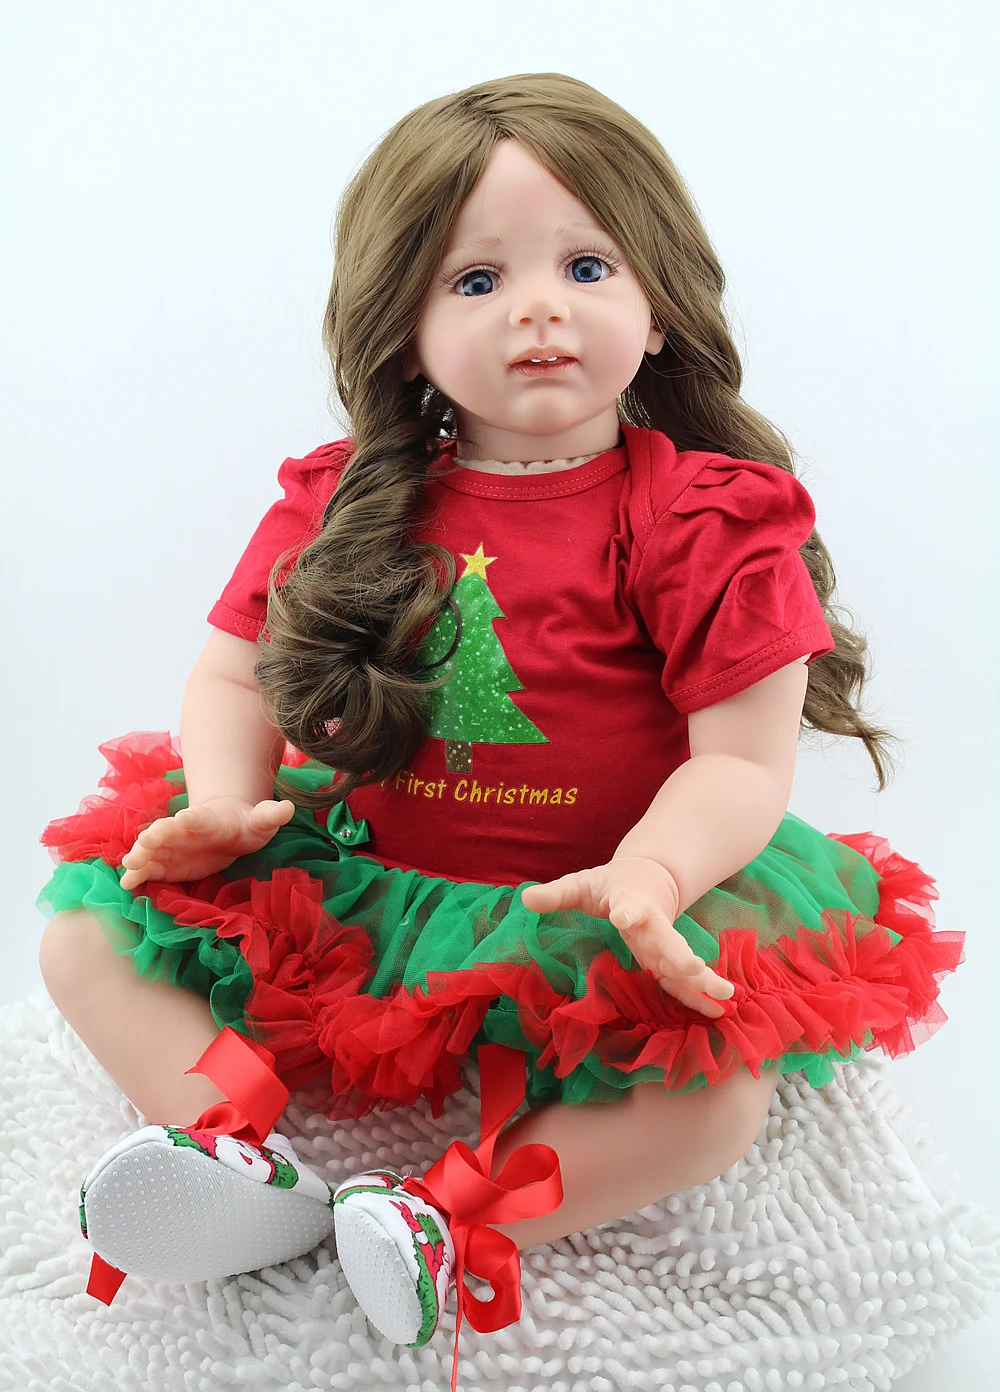 

24inch silicone princess toddler doll big size Reborn baby doll lol Toys Handmade lifelike girls collectible doll play house